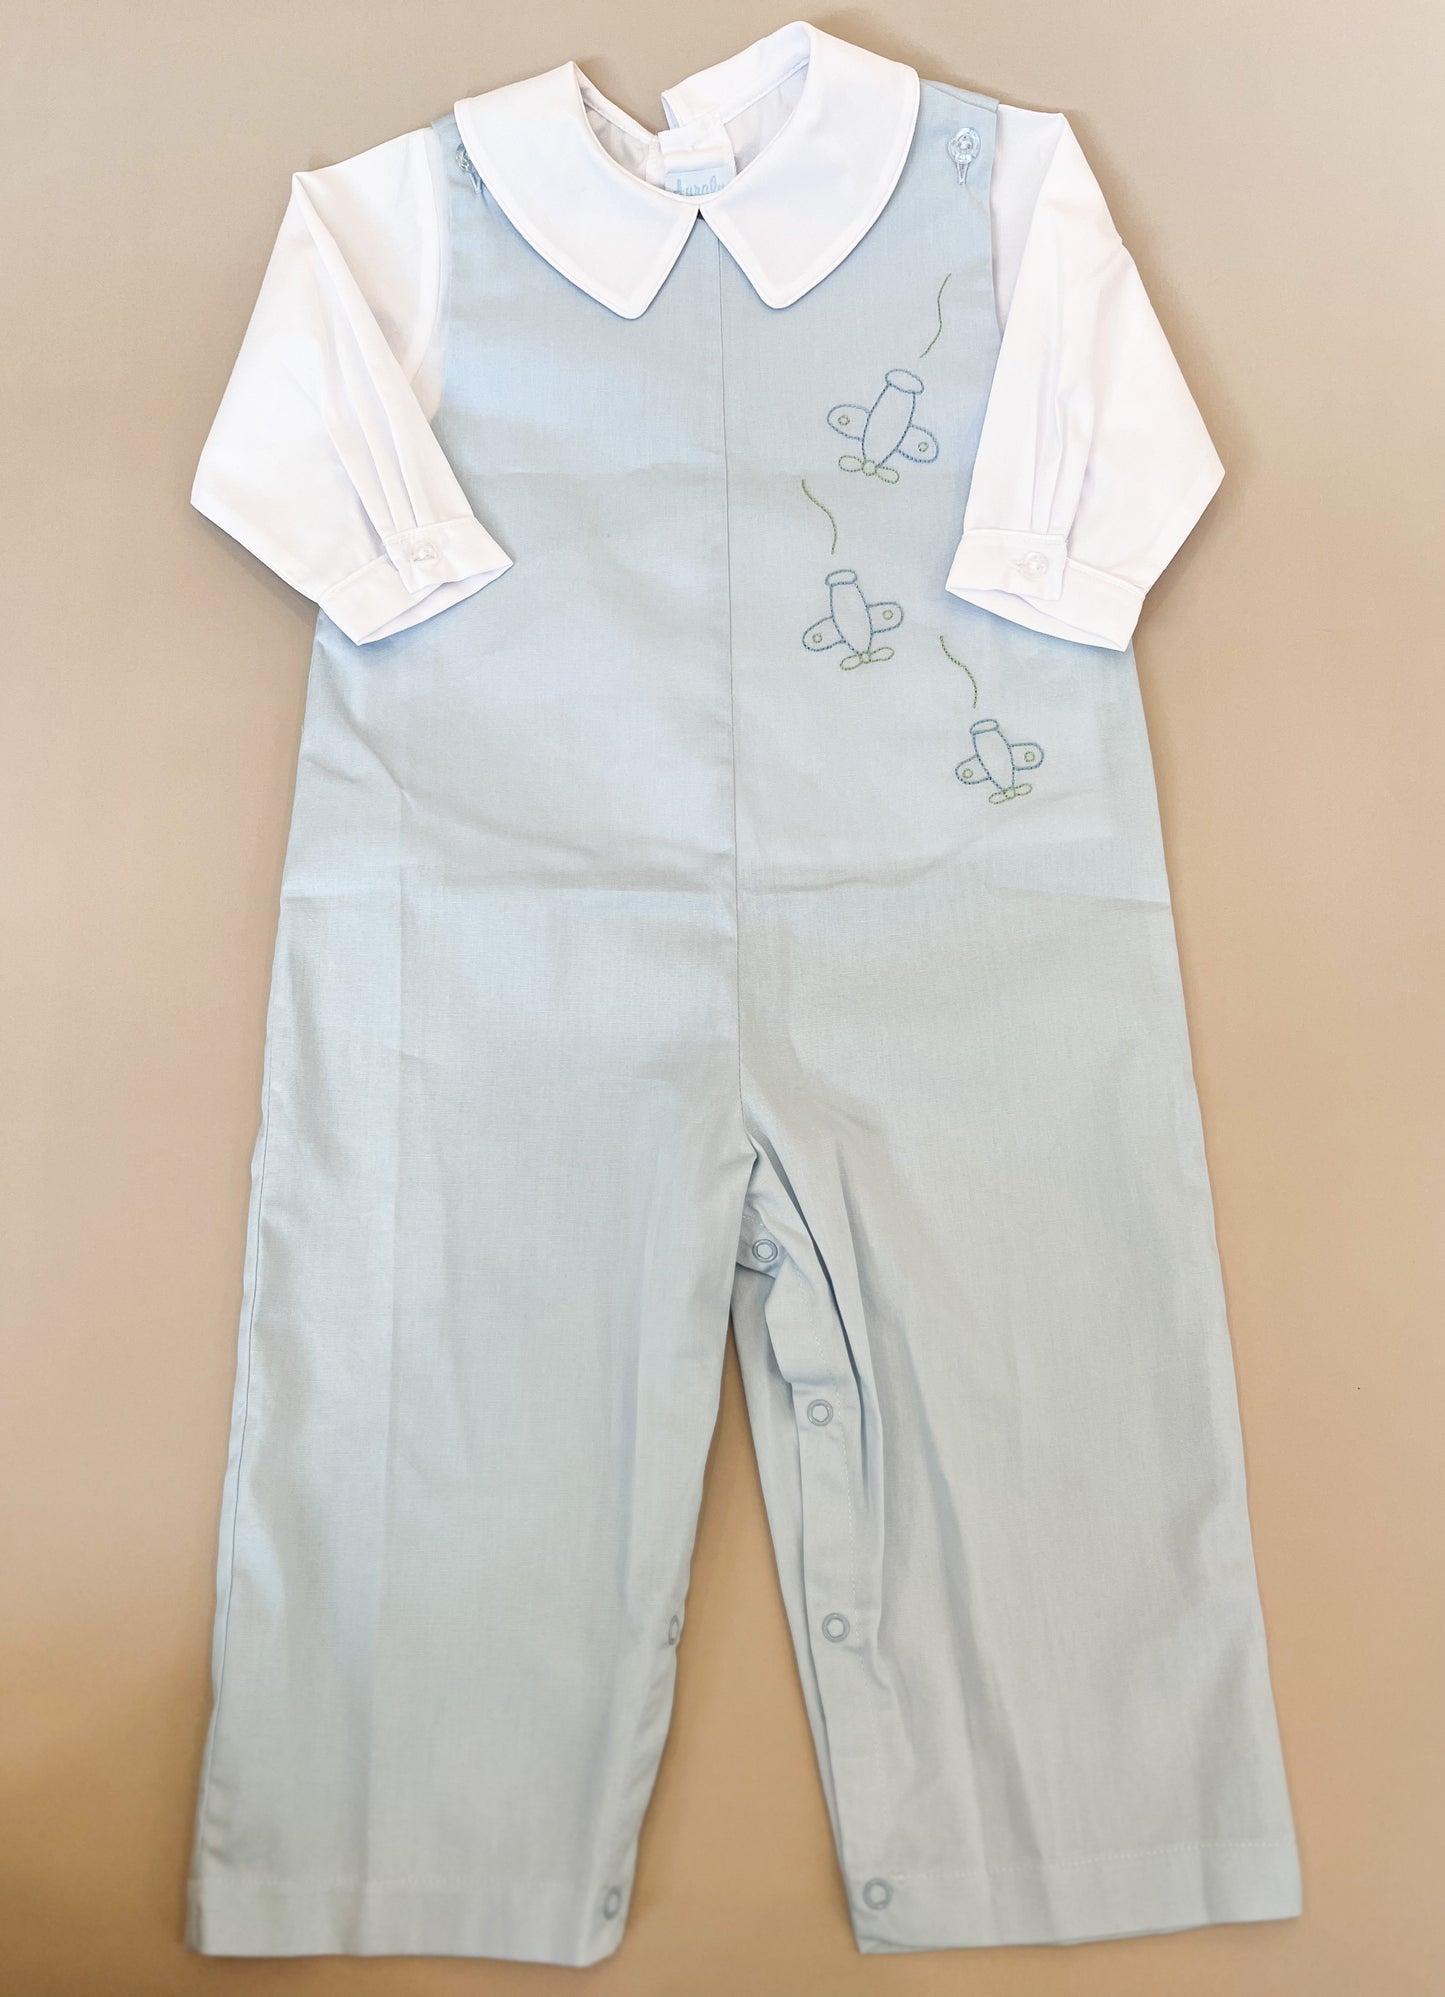 Embroidered Plane Overall & Shirt Set - Magpies Paducah